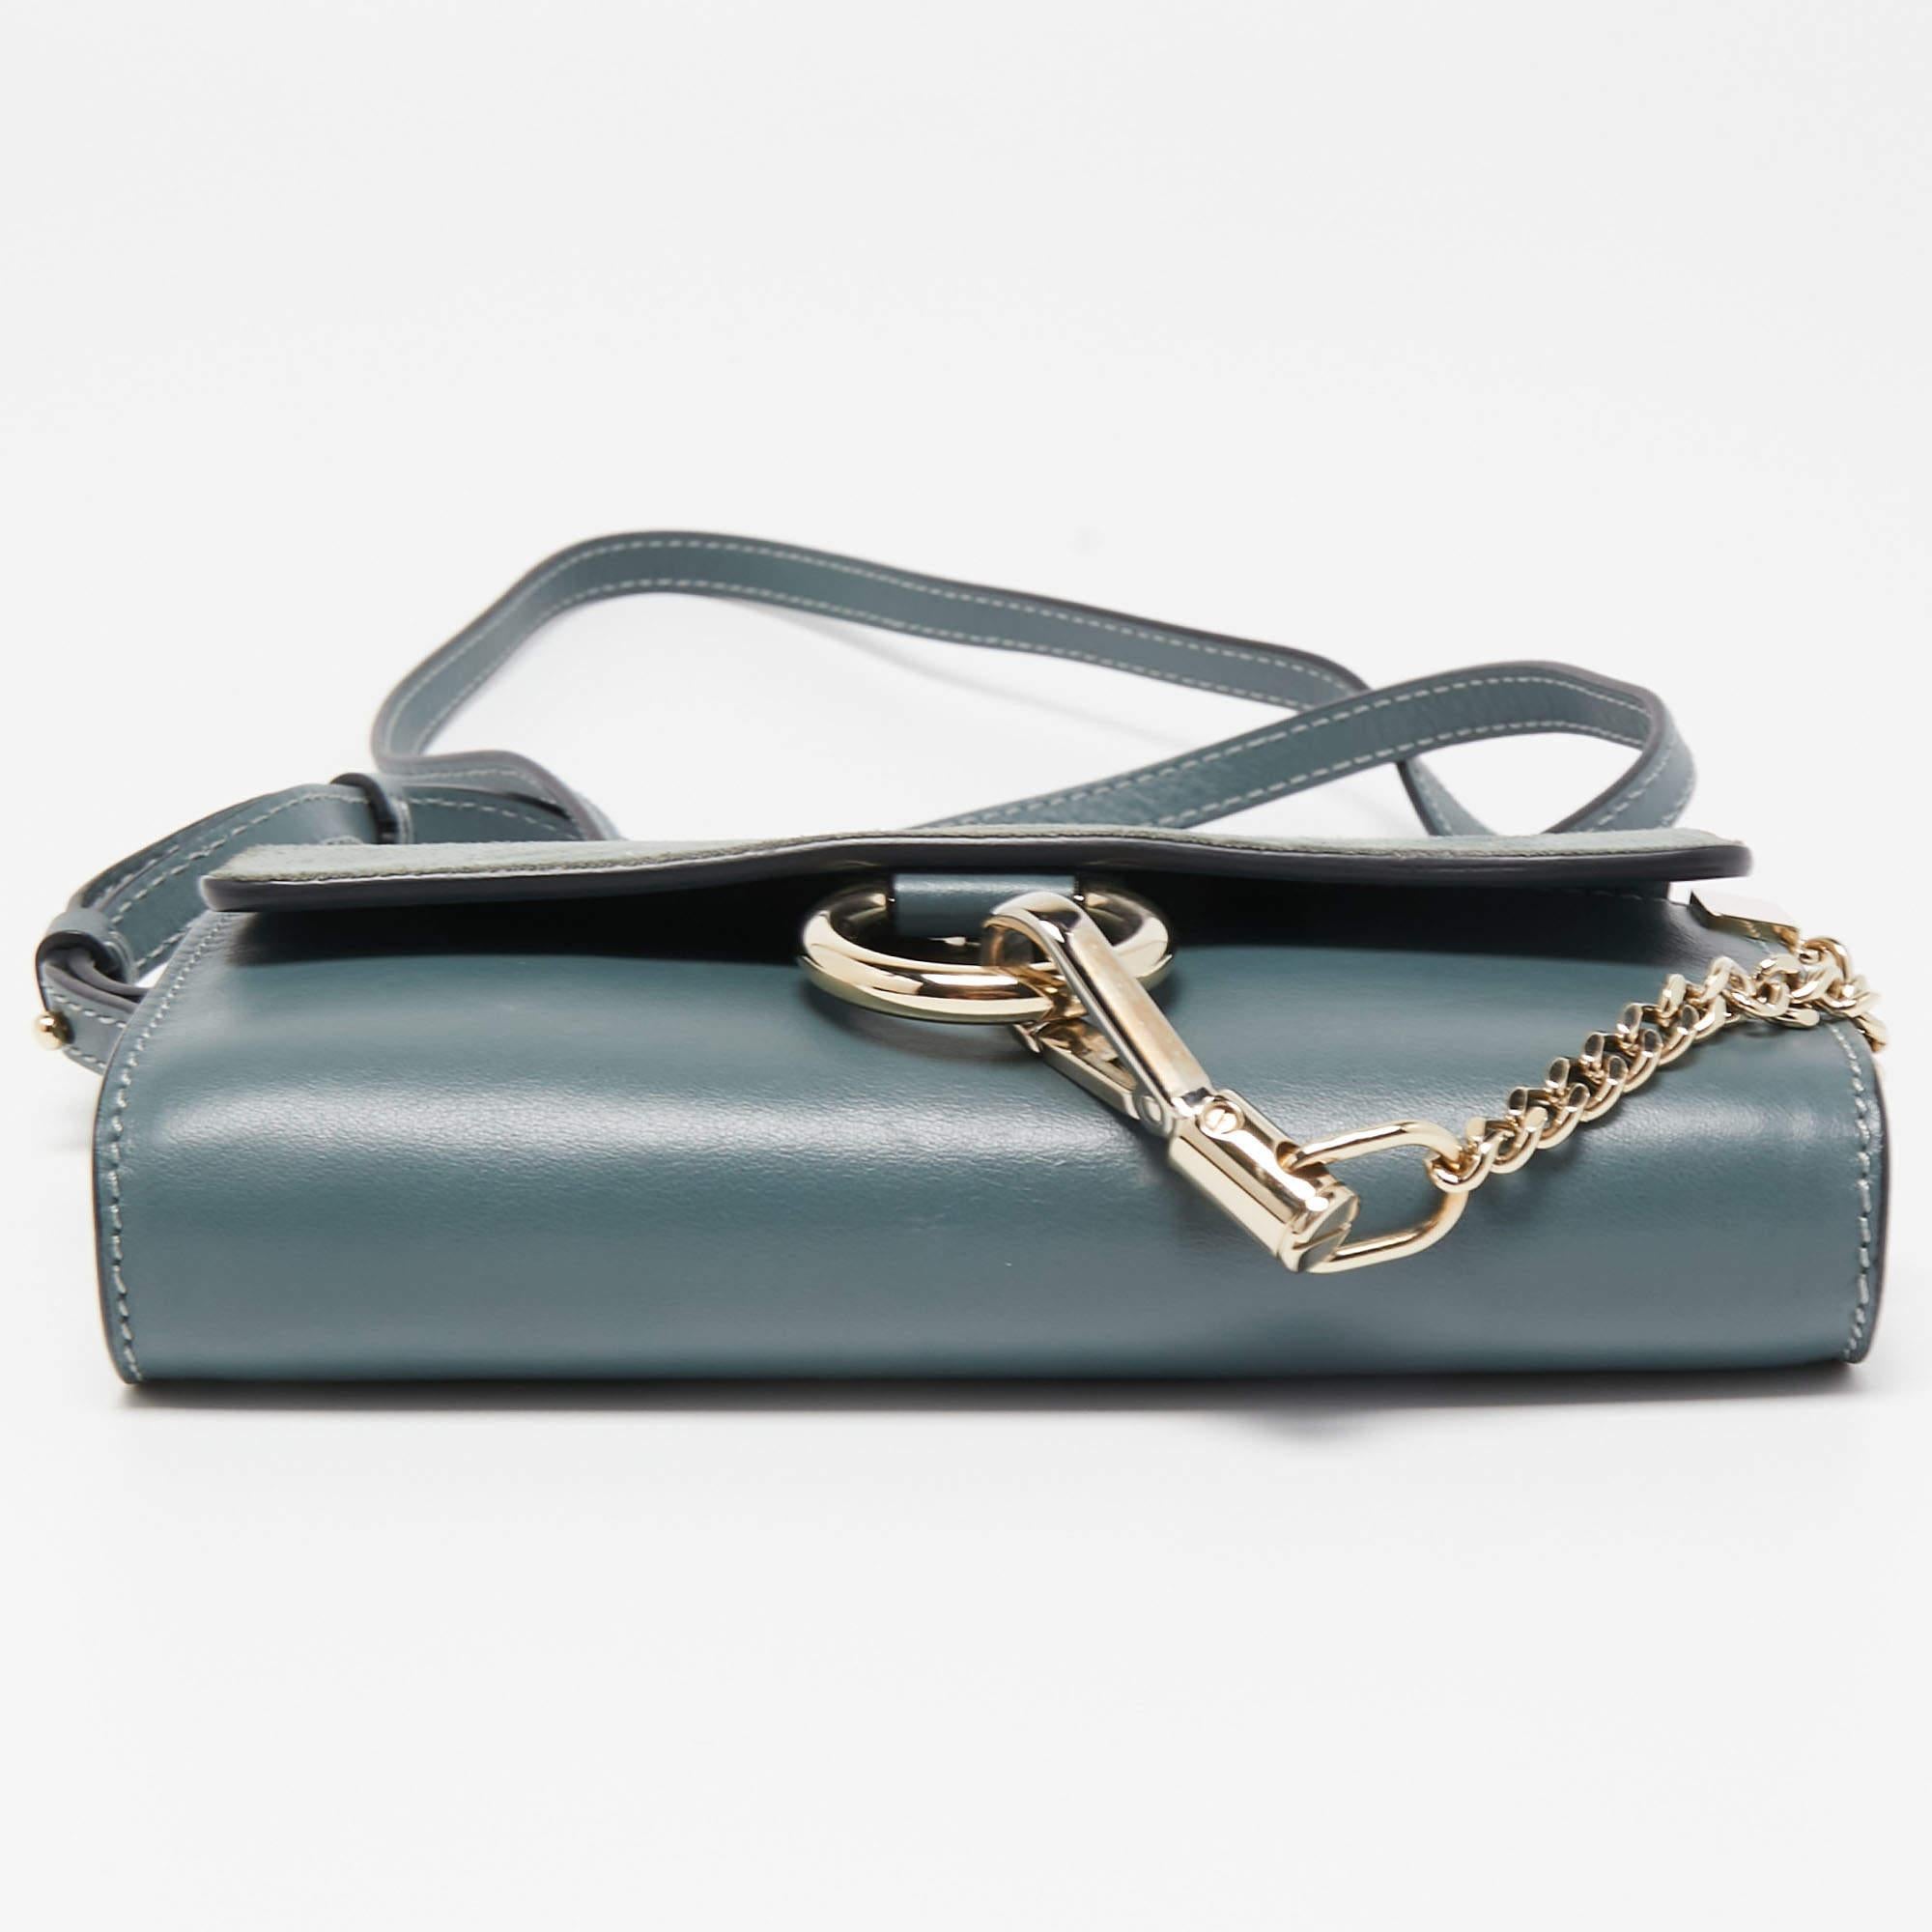 Chloe Blue Leather and Suede Mini Faye Shoulder Bag 7